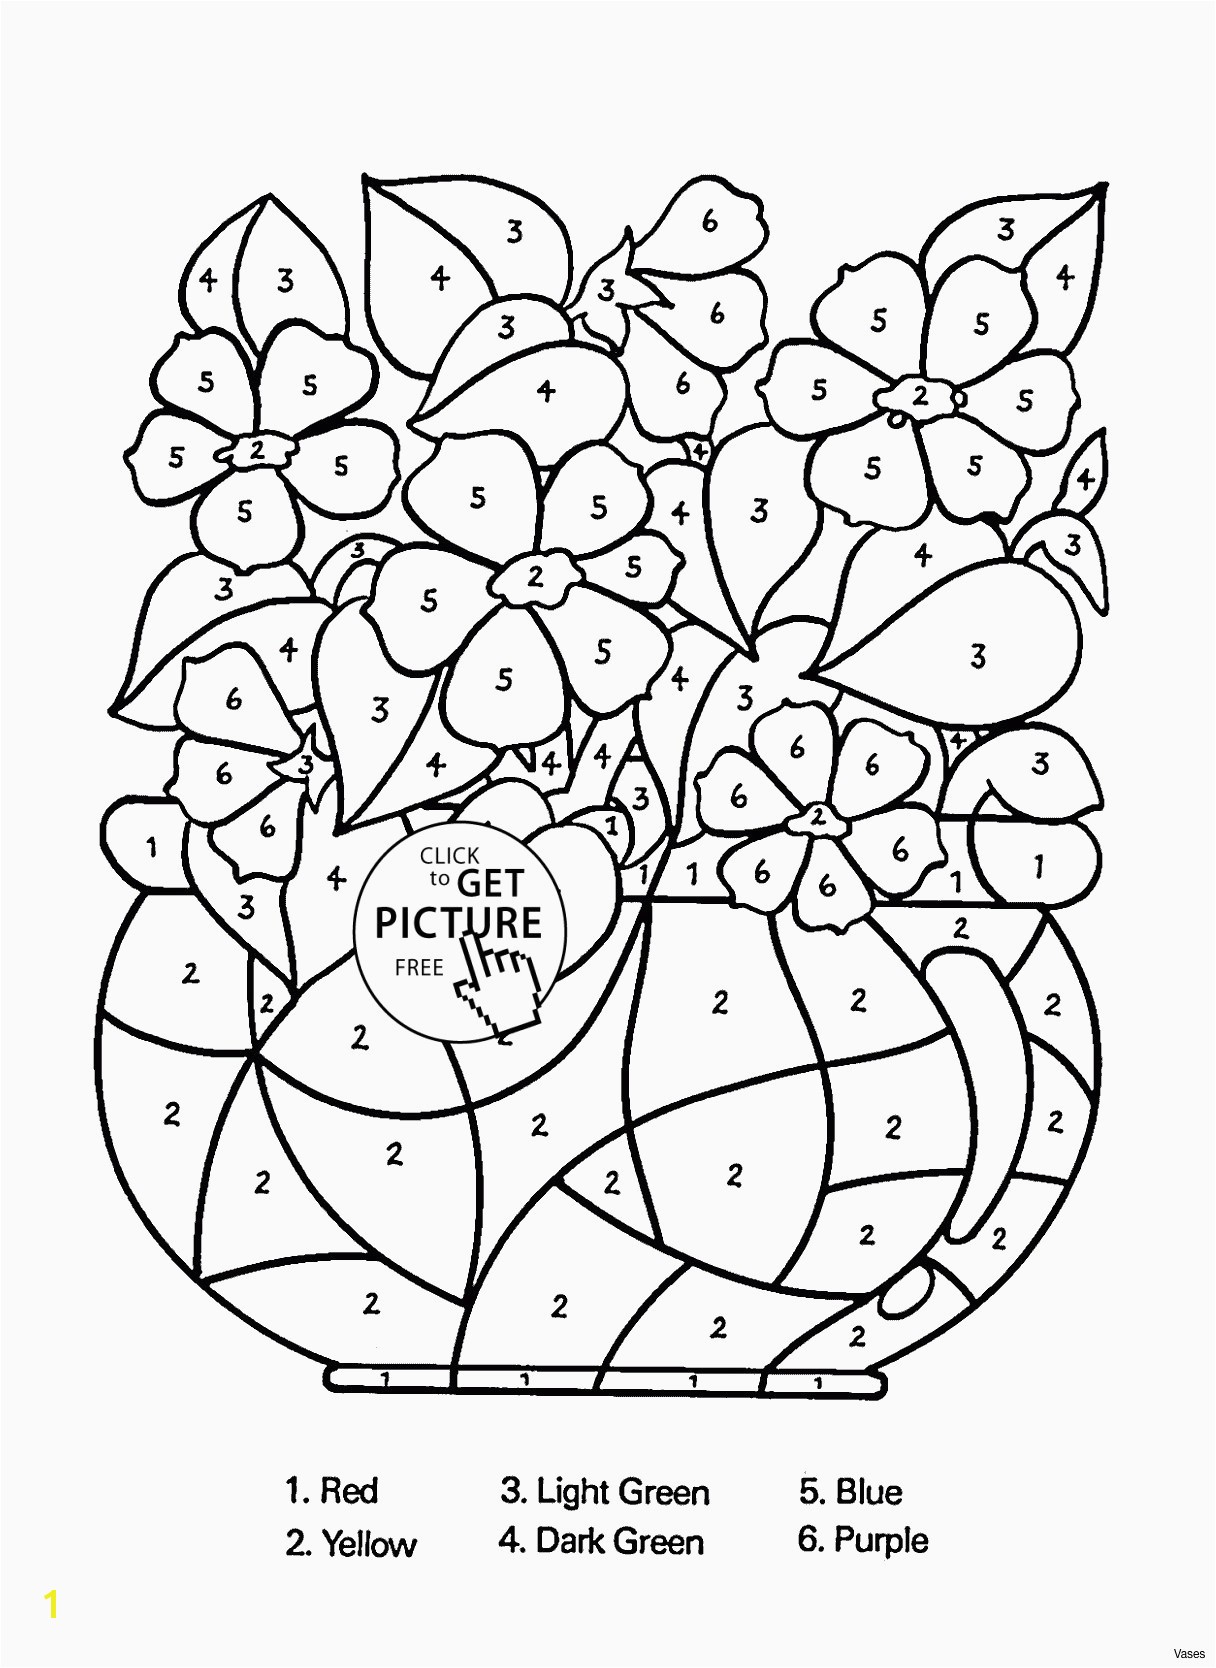 Free Coloring Pages For Adults Crocodile Coloring Pages